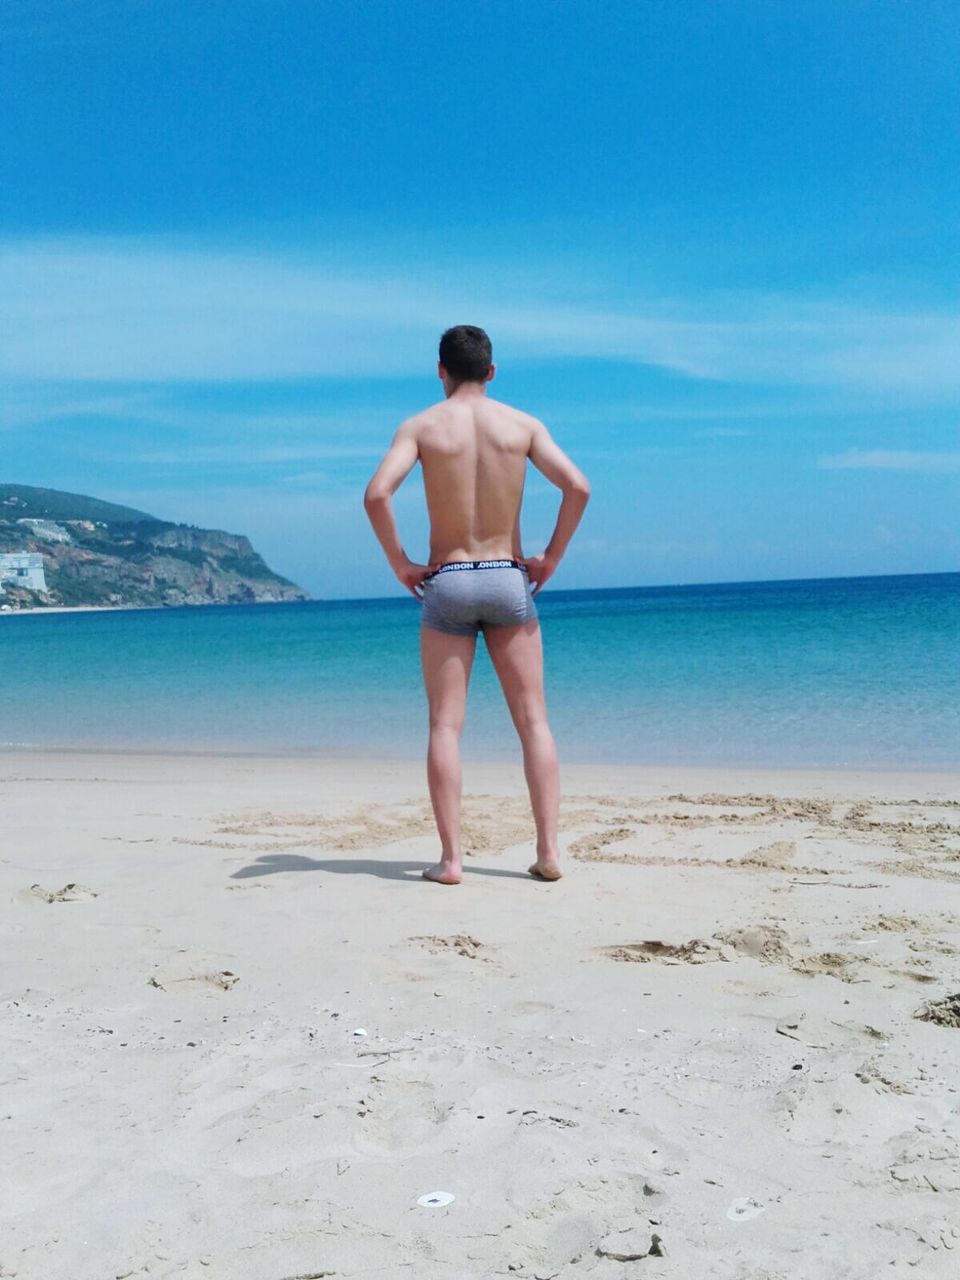 REAR VIEW OF MAN STANDING ON BEACH